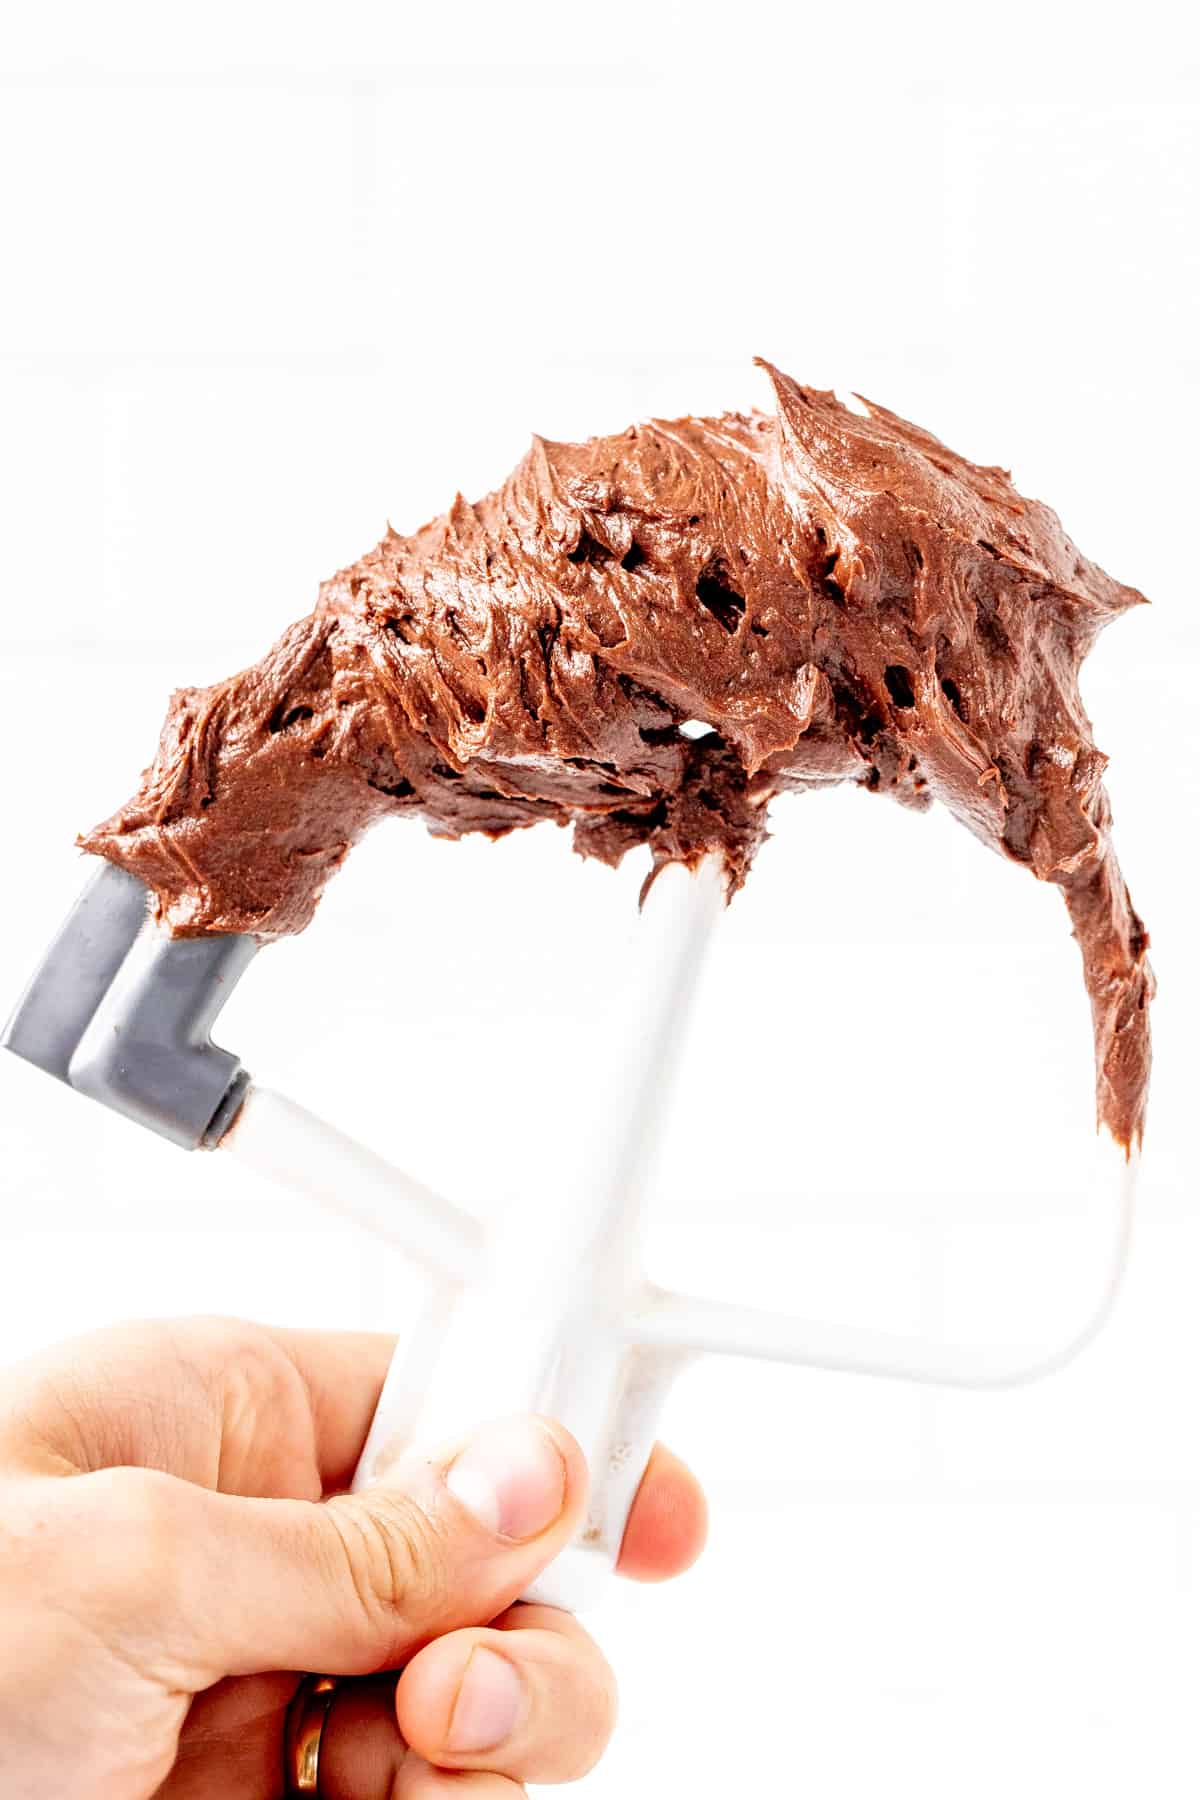 Kitchenaid beater covered in chocolate frosting